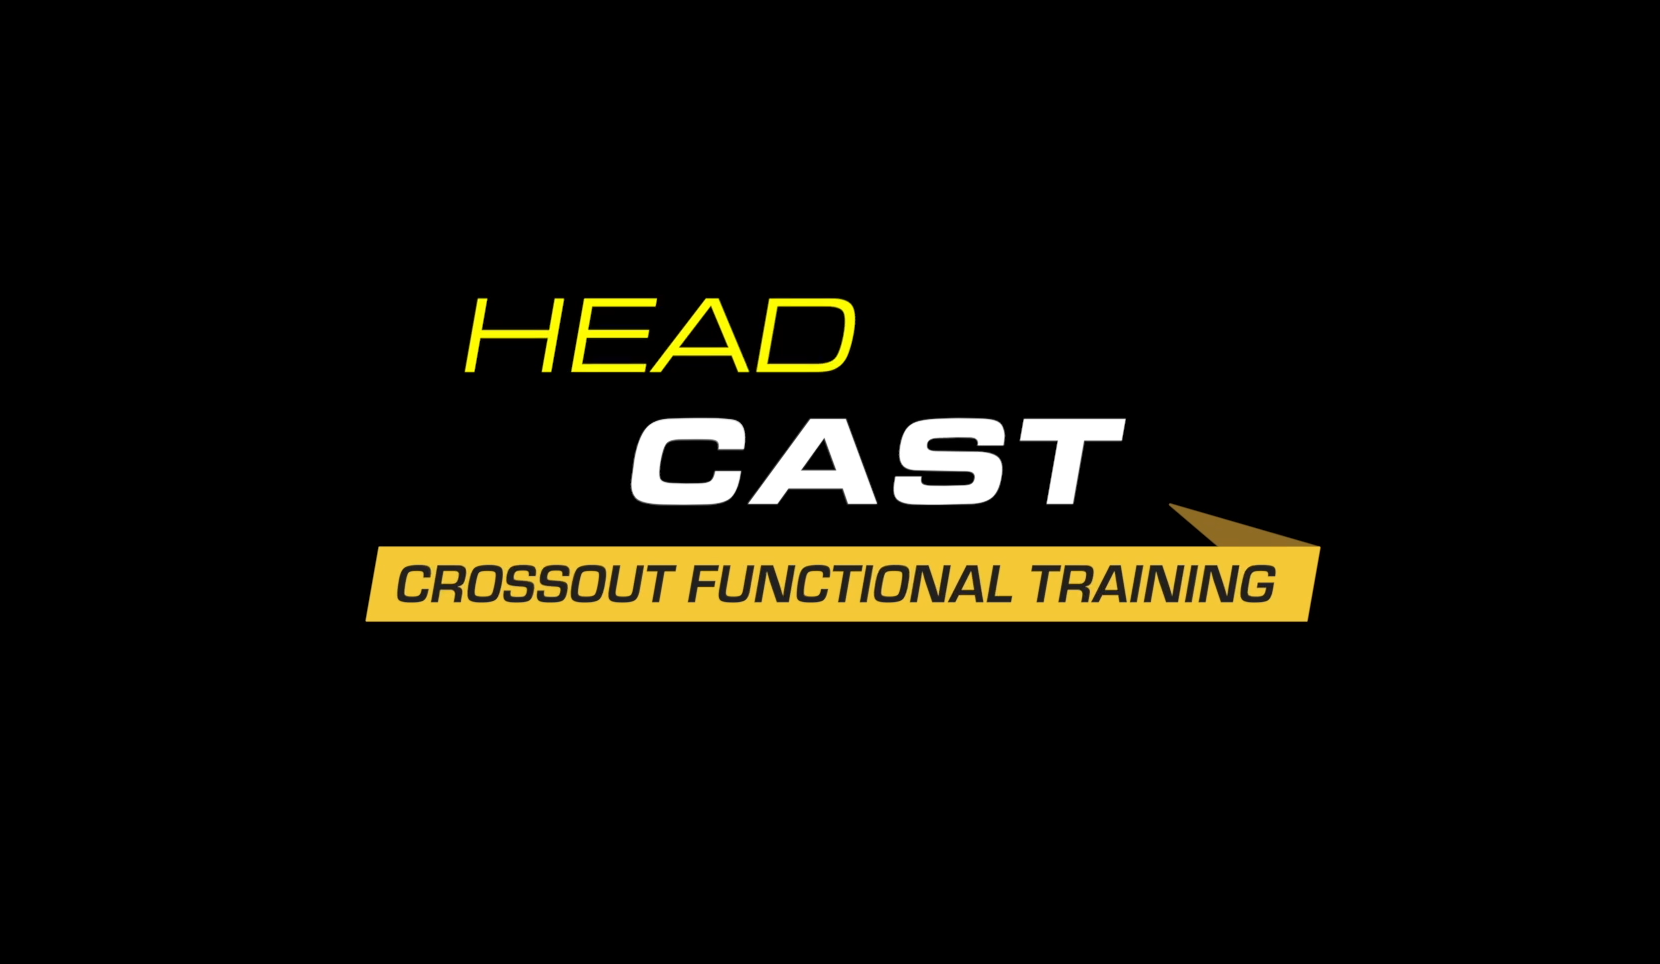 Head Cast Crossout Functional Training